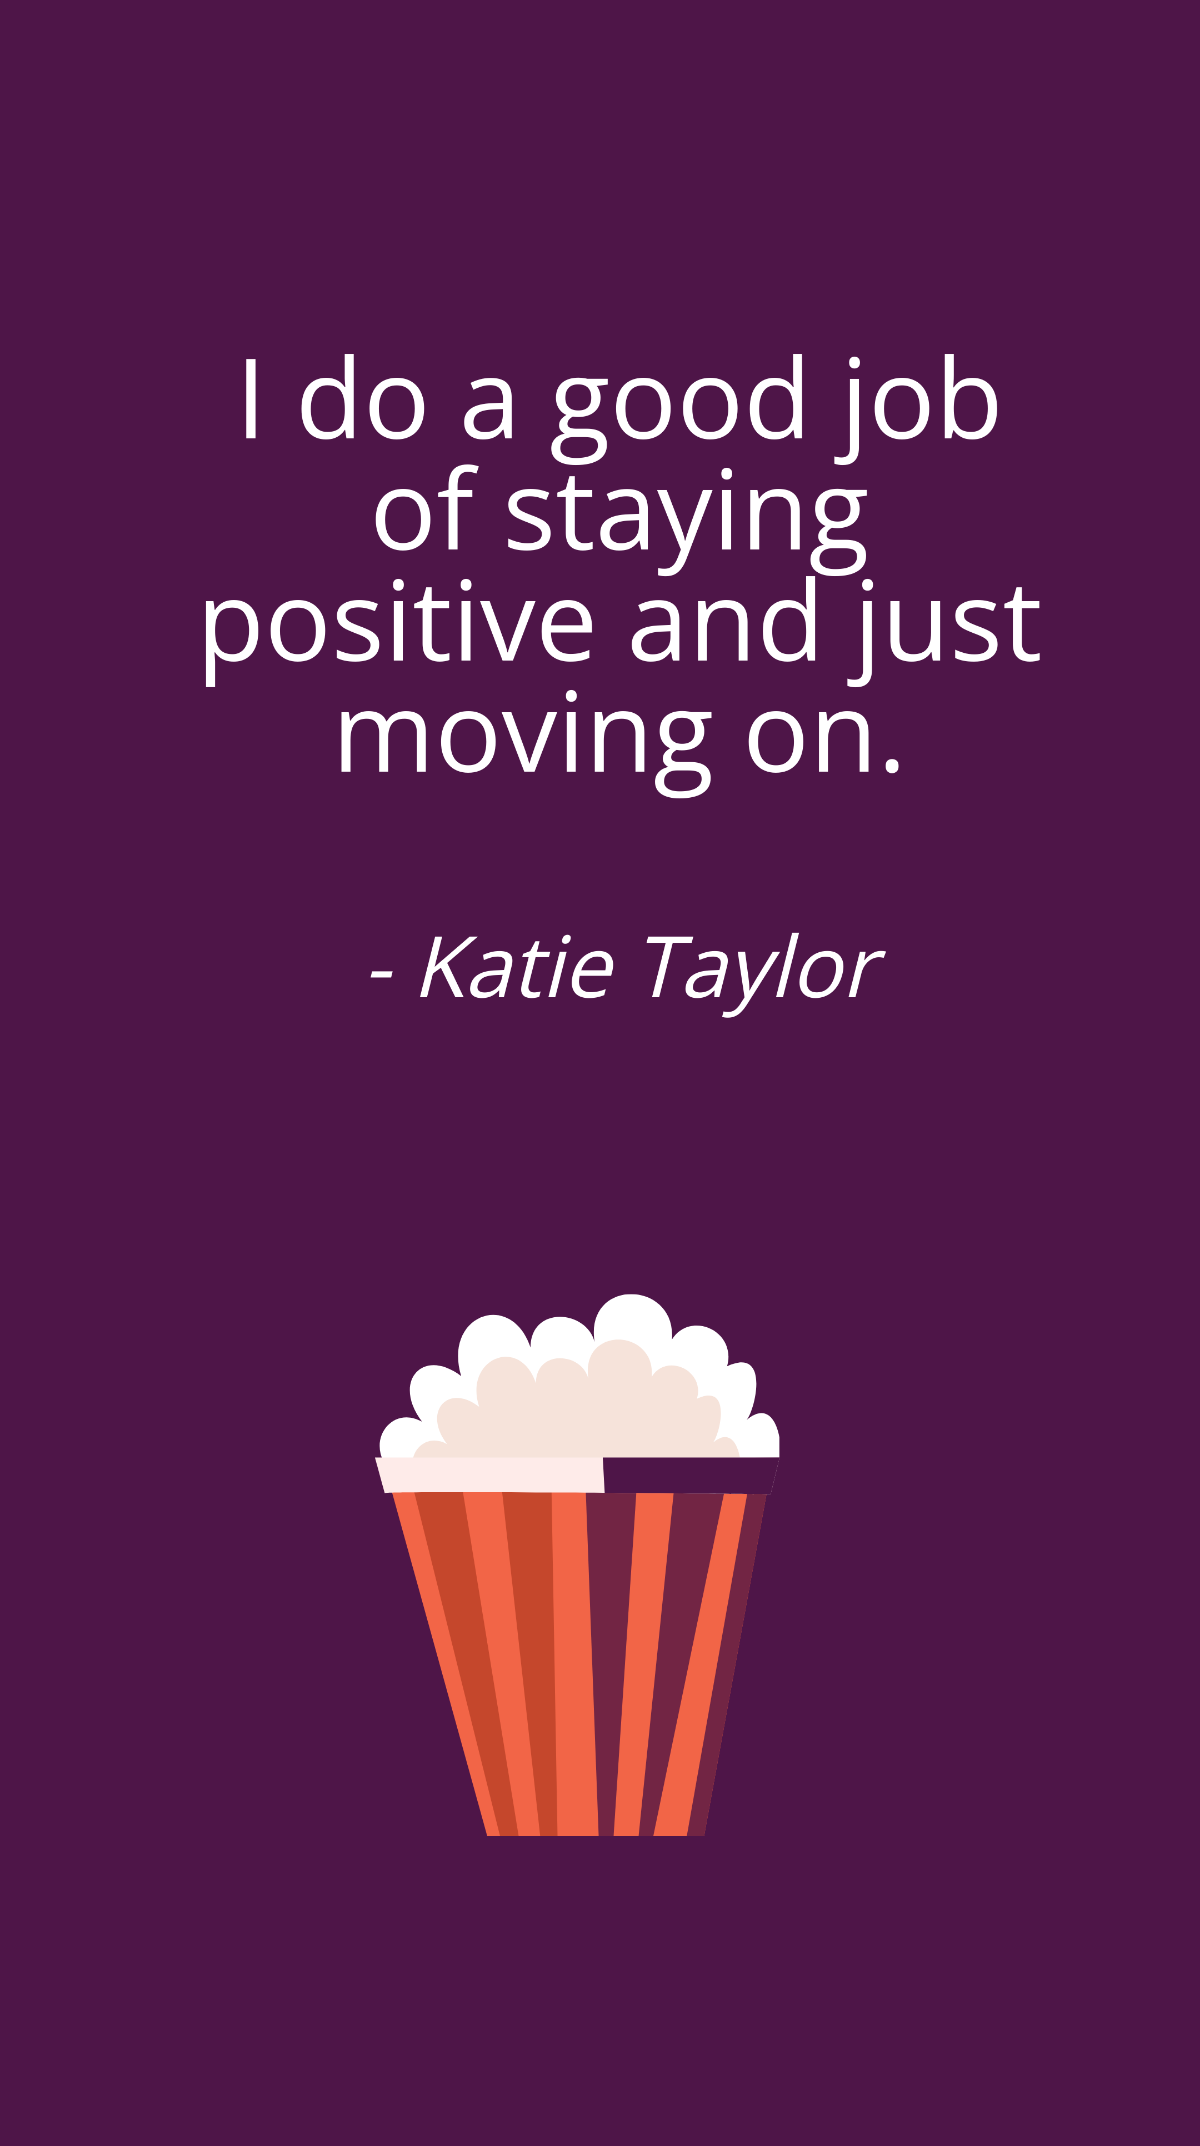 Katie Taylor - I do a good job of staying positive and just moving on. Template